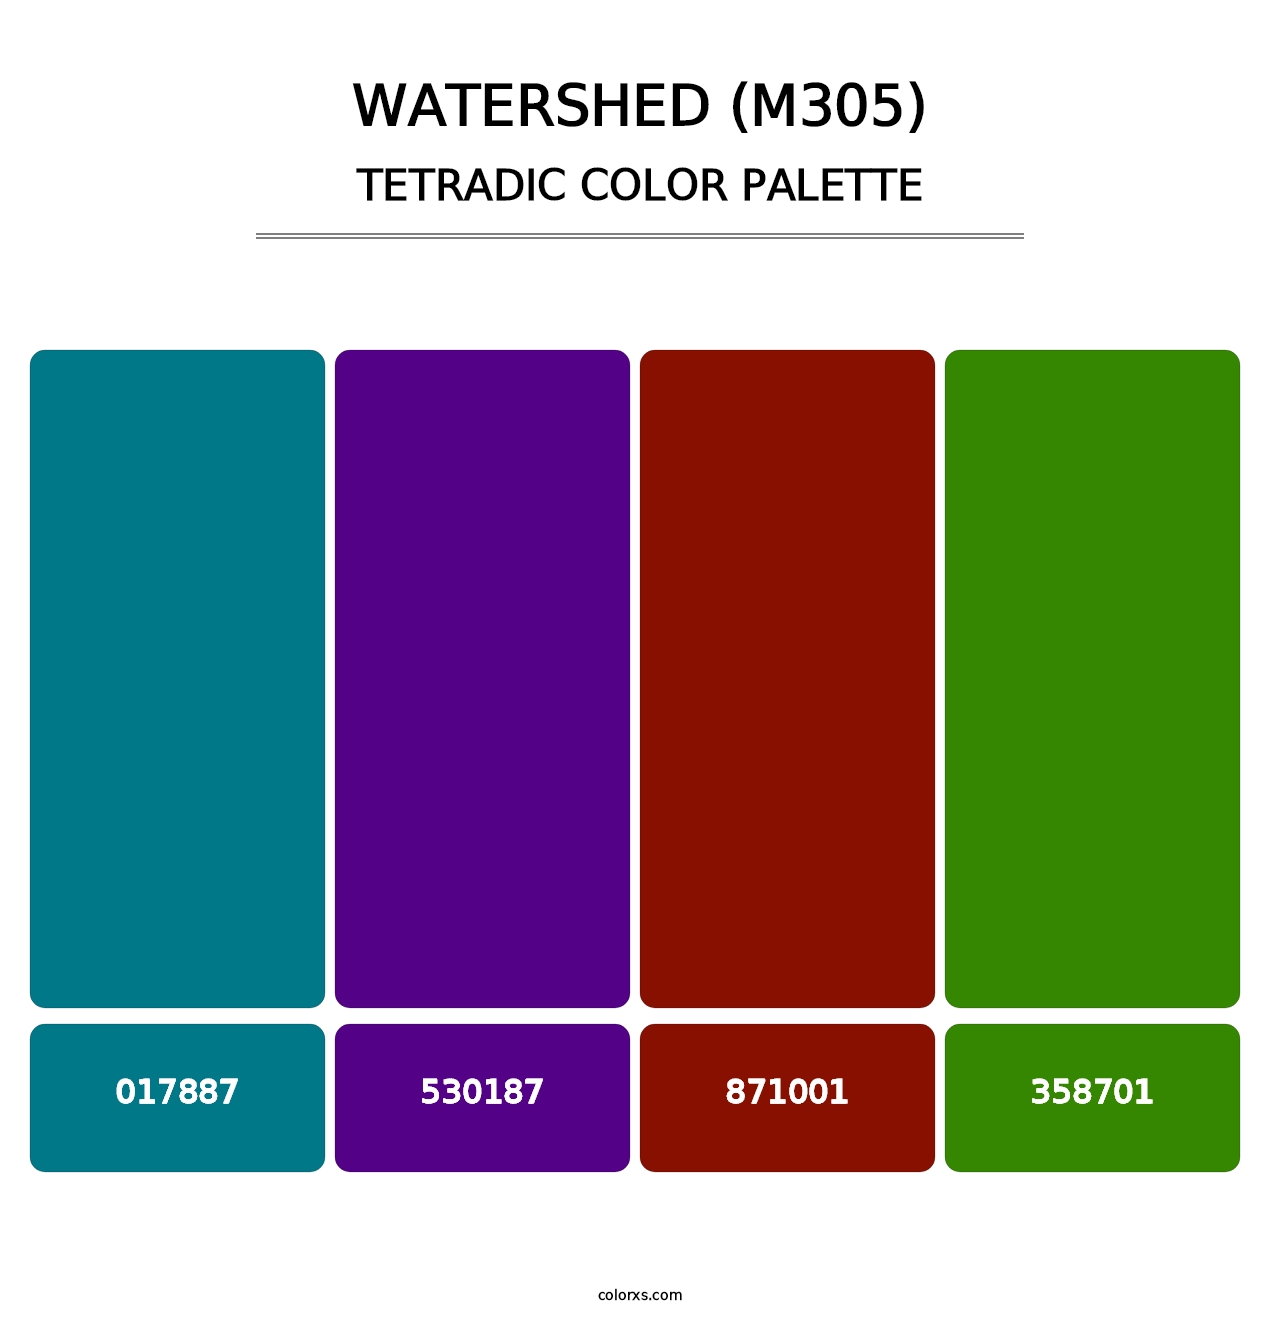 Watershed (M305) - Tetradic Color Palette